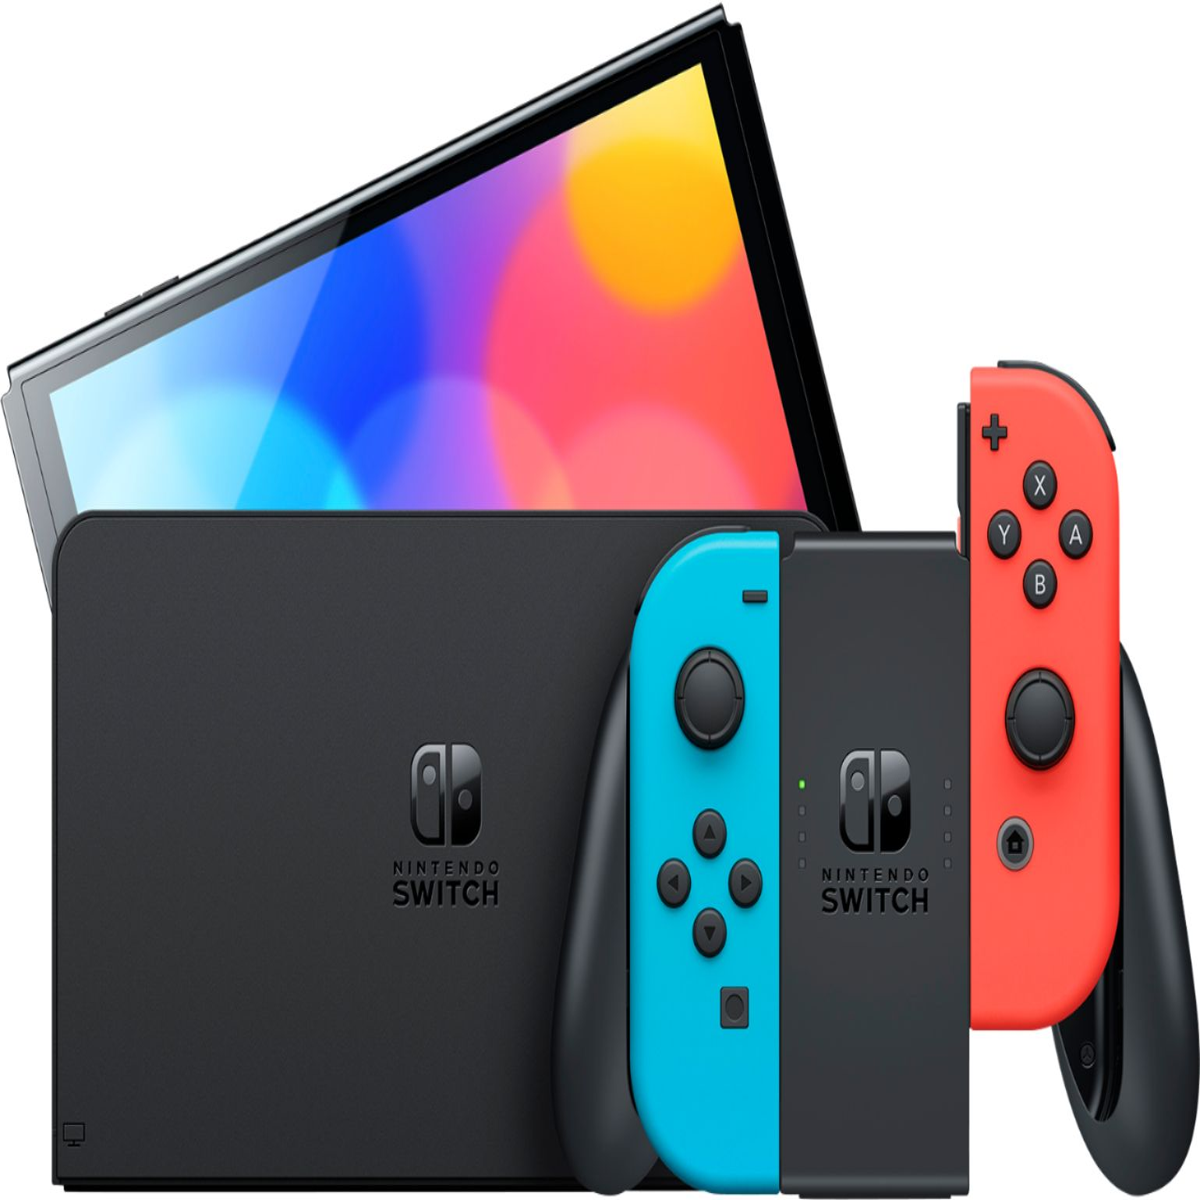 This Nintendo Switch OLED Black Friday deal is a CORKER